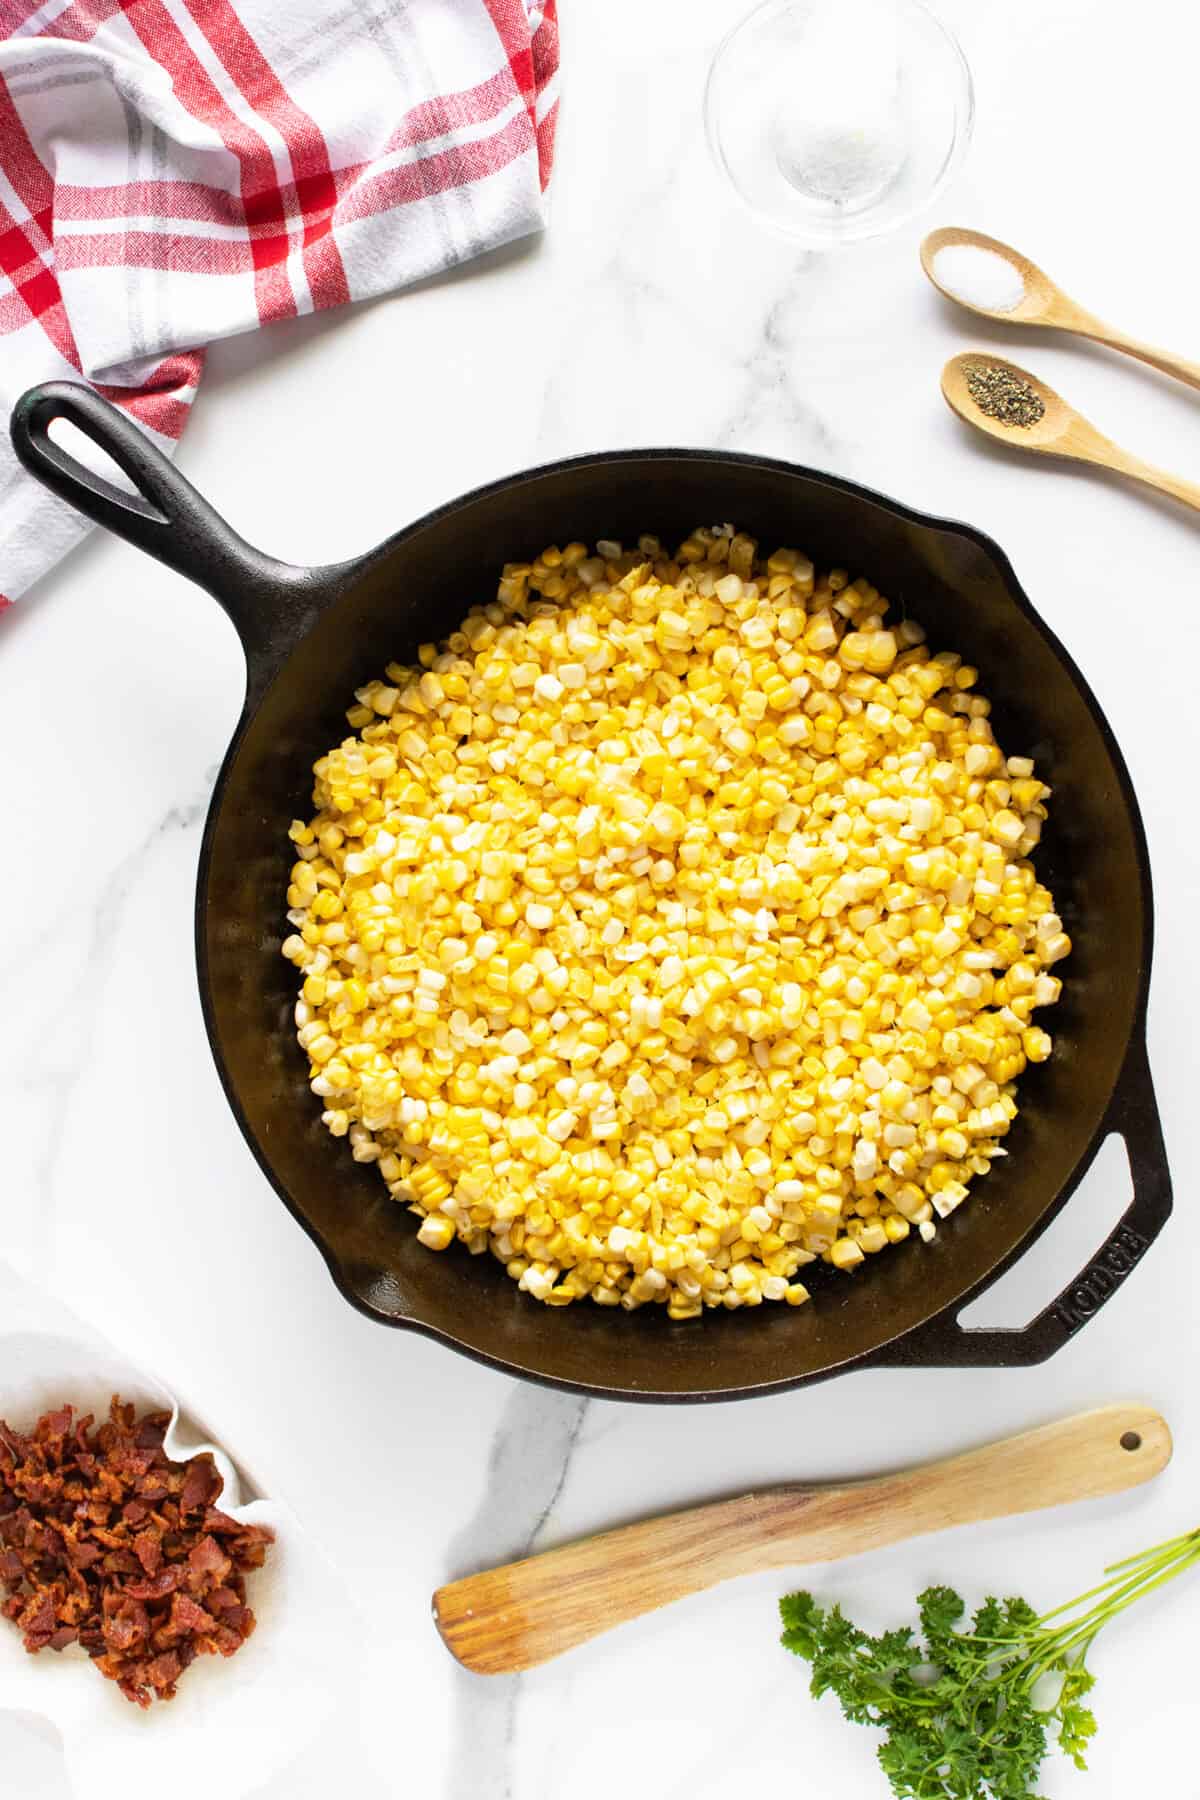 fried corn in a skillet being prepared